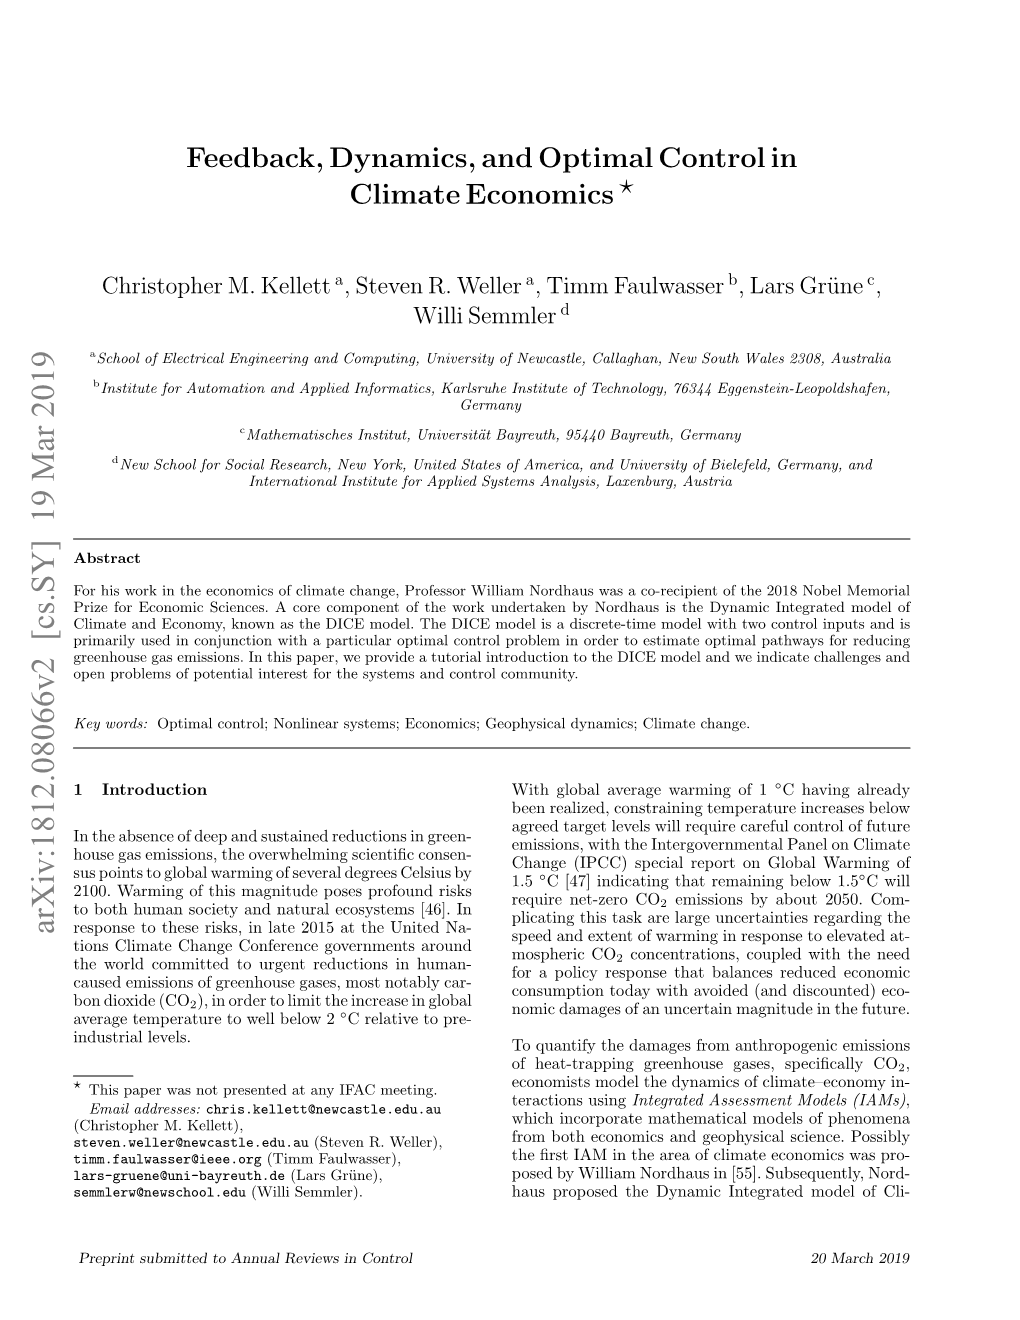 Feedback, Dynamics, and Optimal Control in Climate Economics ?